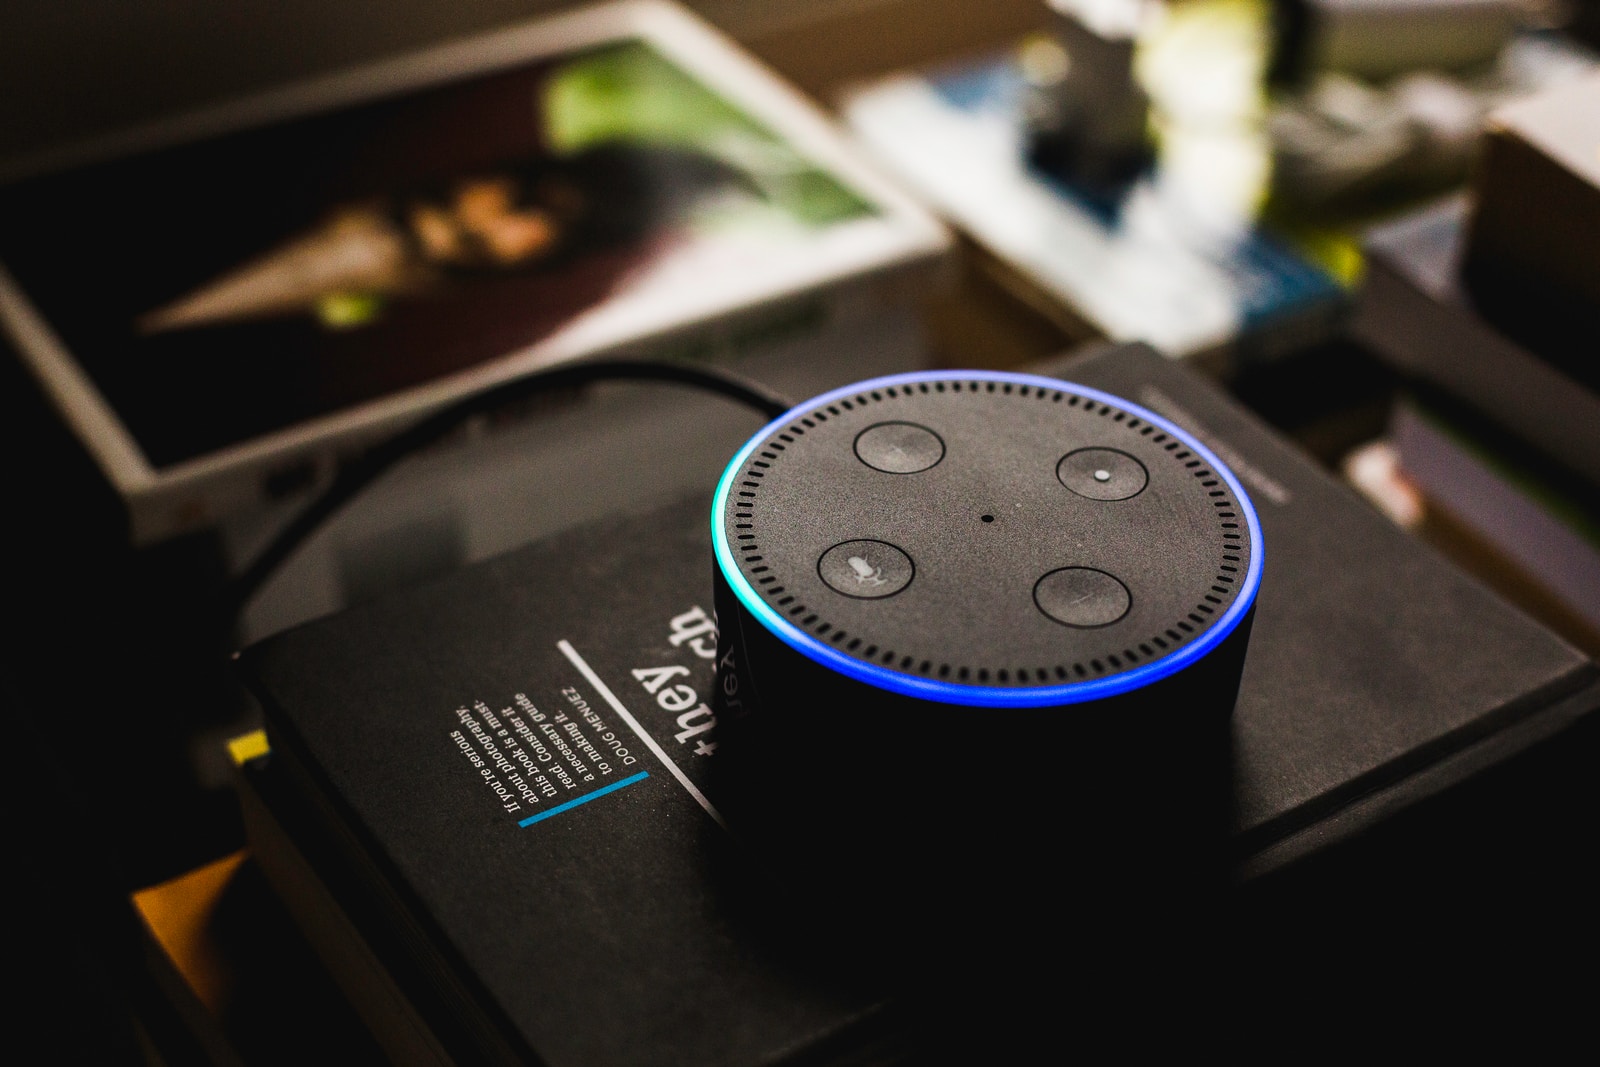 How to put Amazon Echo in a set up mode